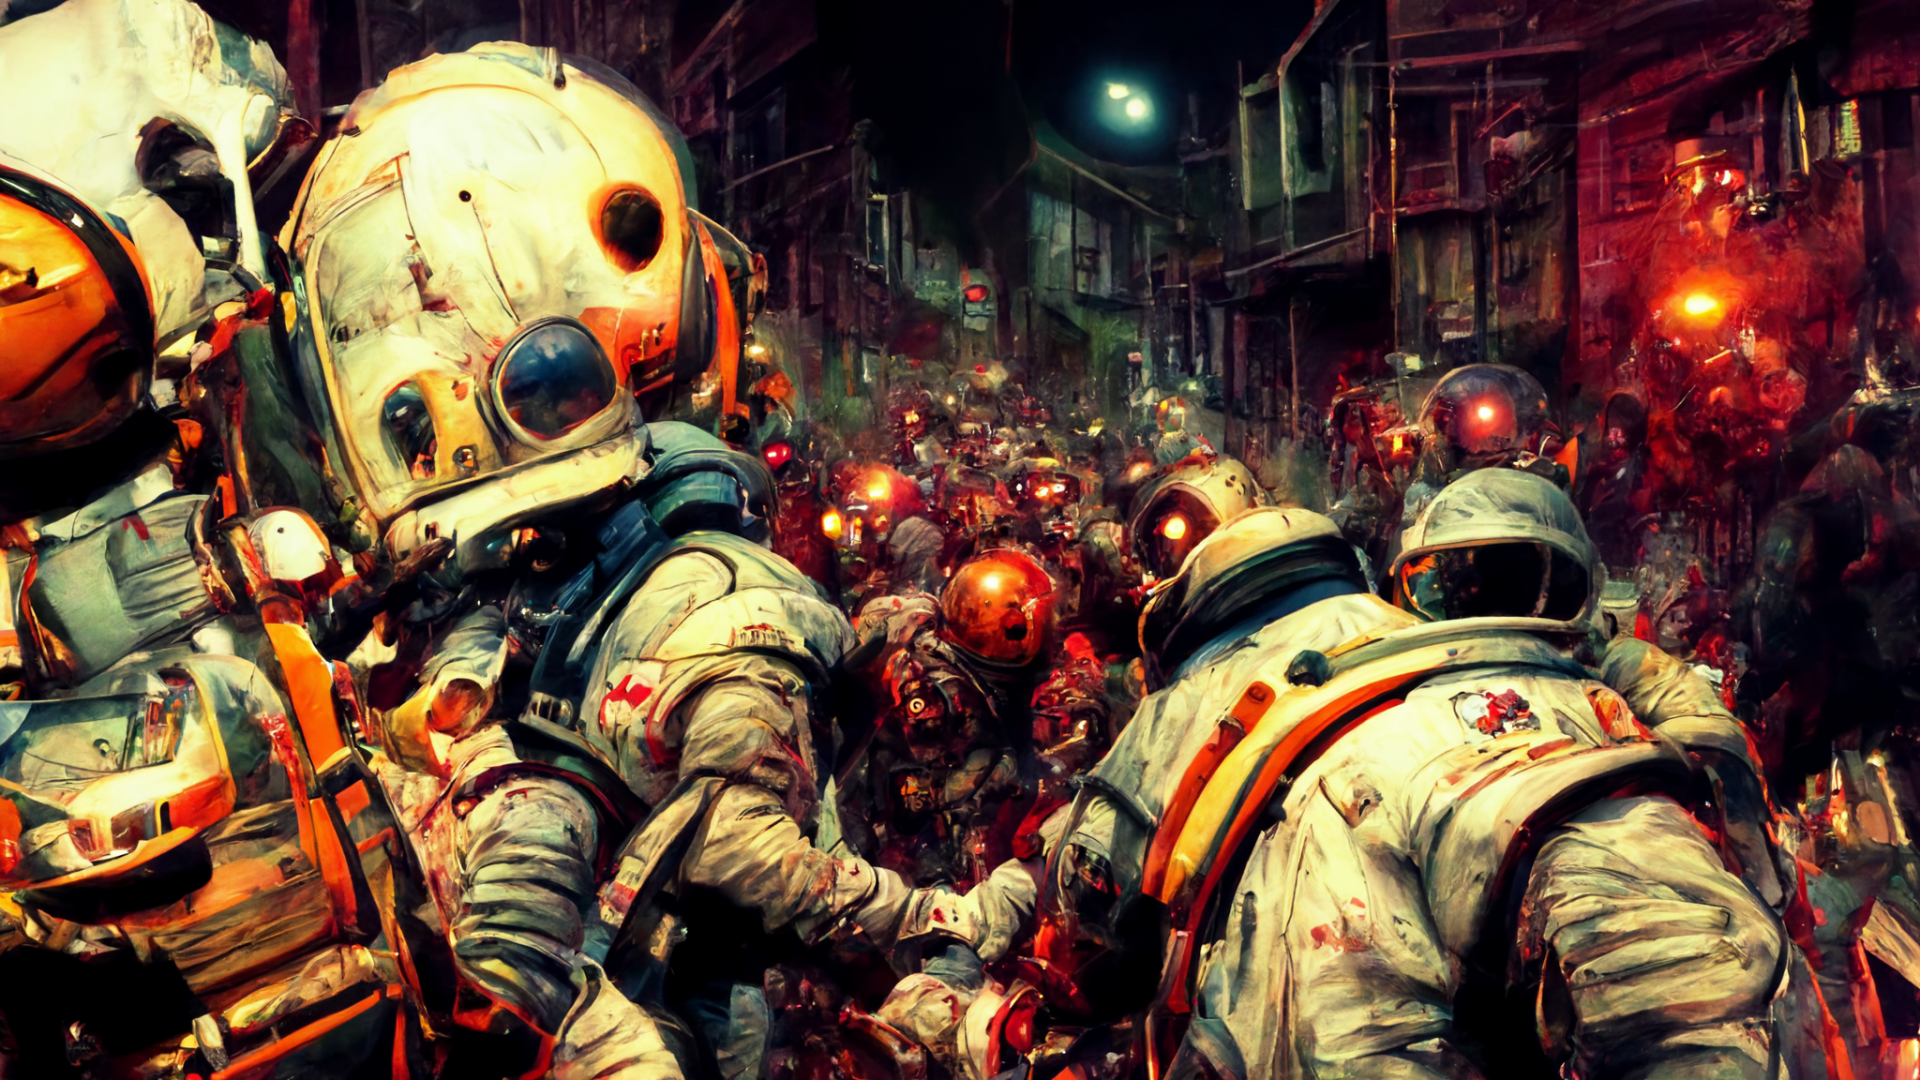 Alican_astronaut_fighting_zombies_in_the_street_realistic_wallp_c2d0e508-c000-4a6c-9d4e-c356e2...png